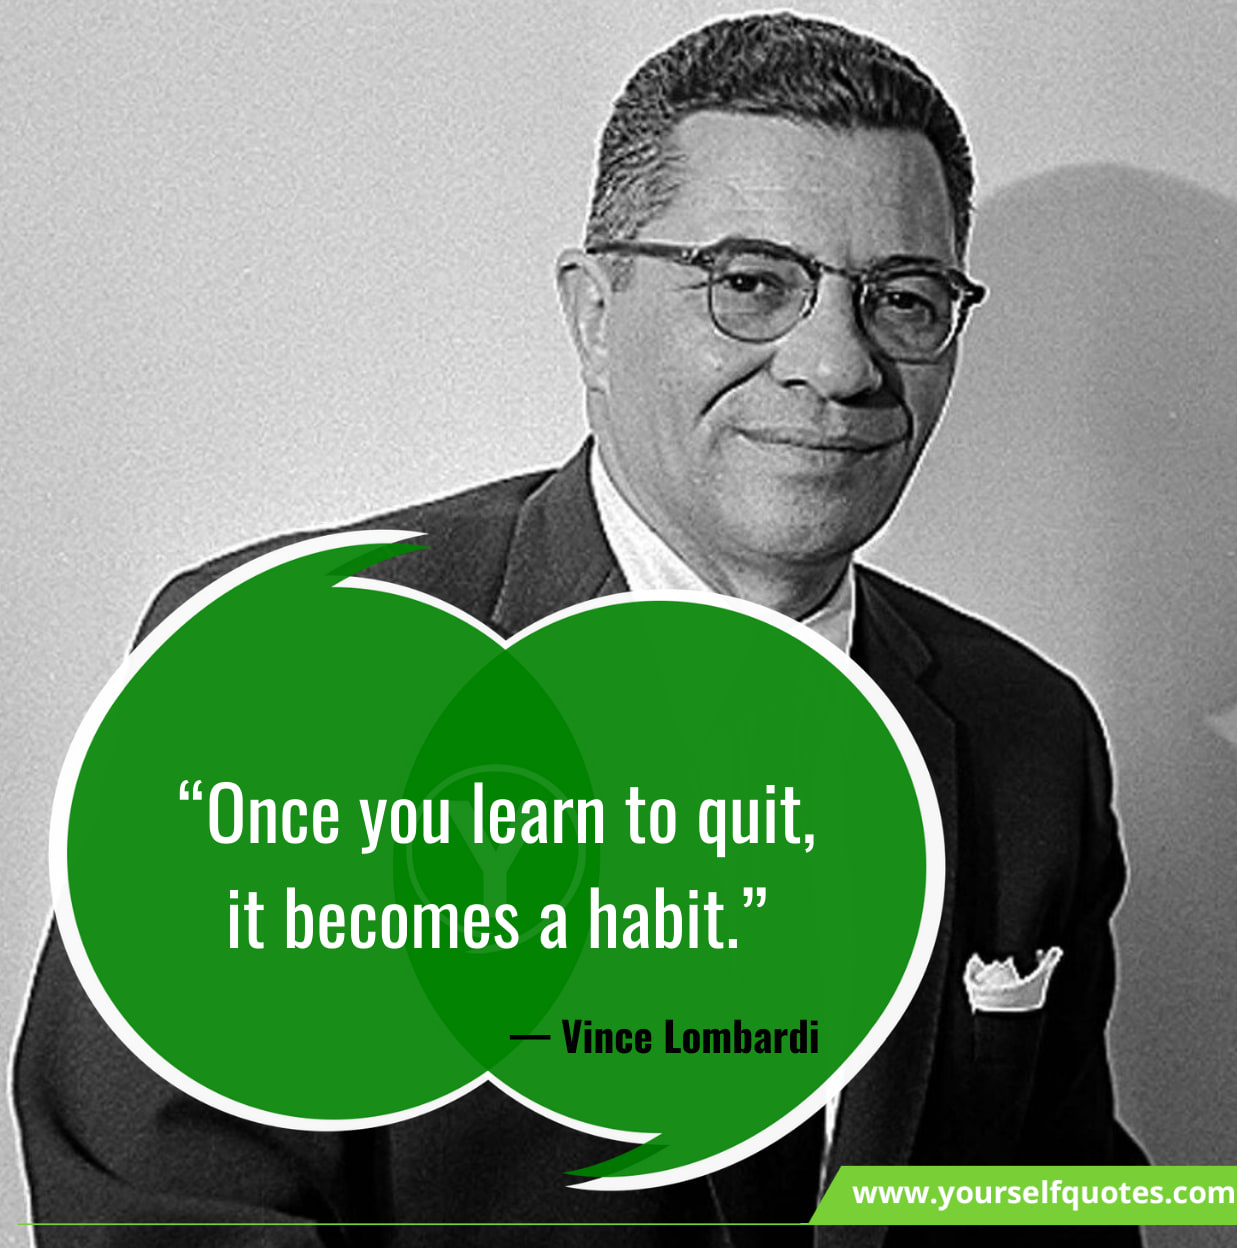 Vince Lombardi Quotes On Failure